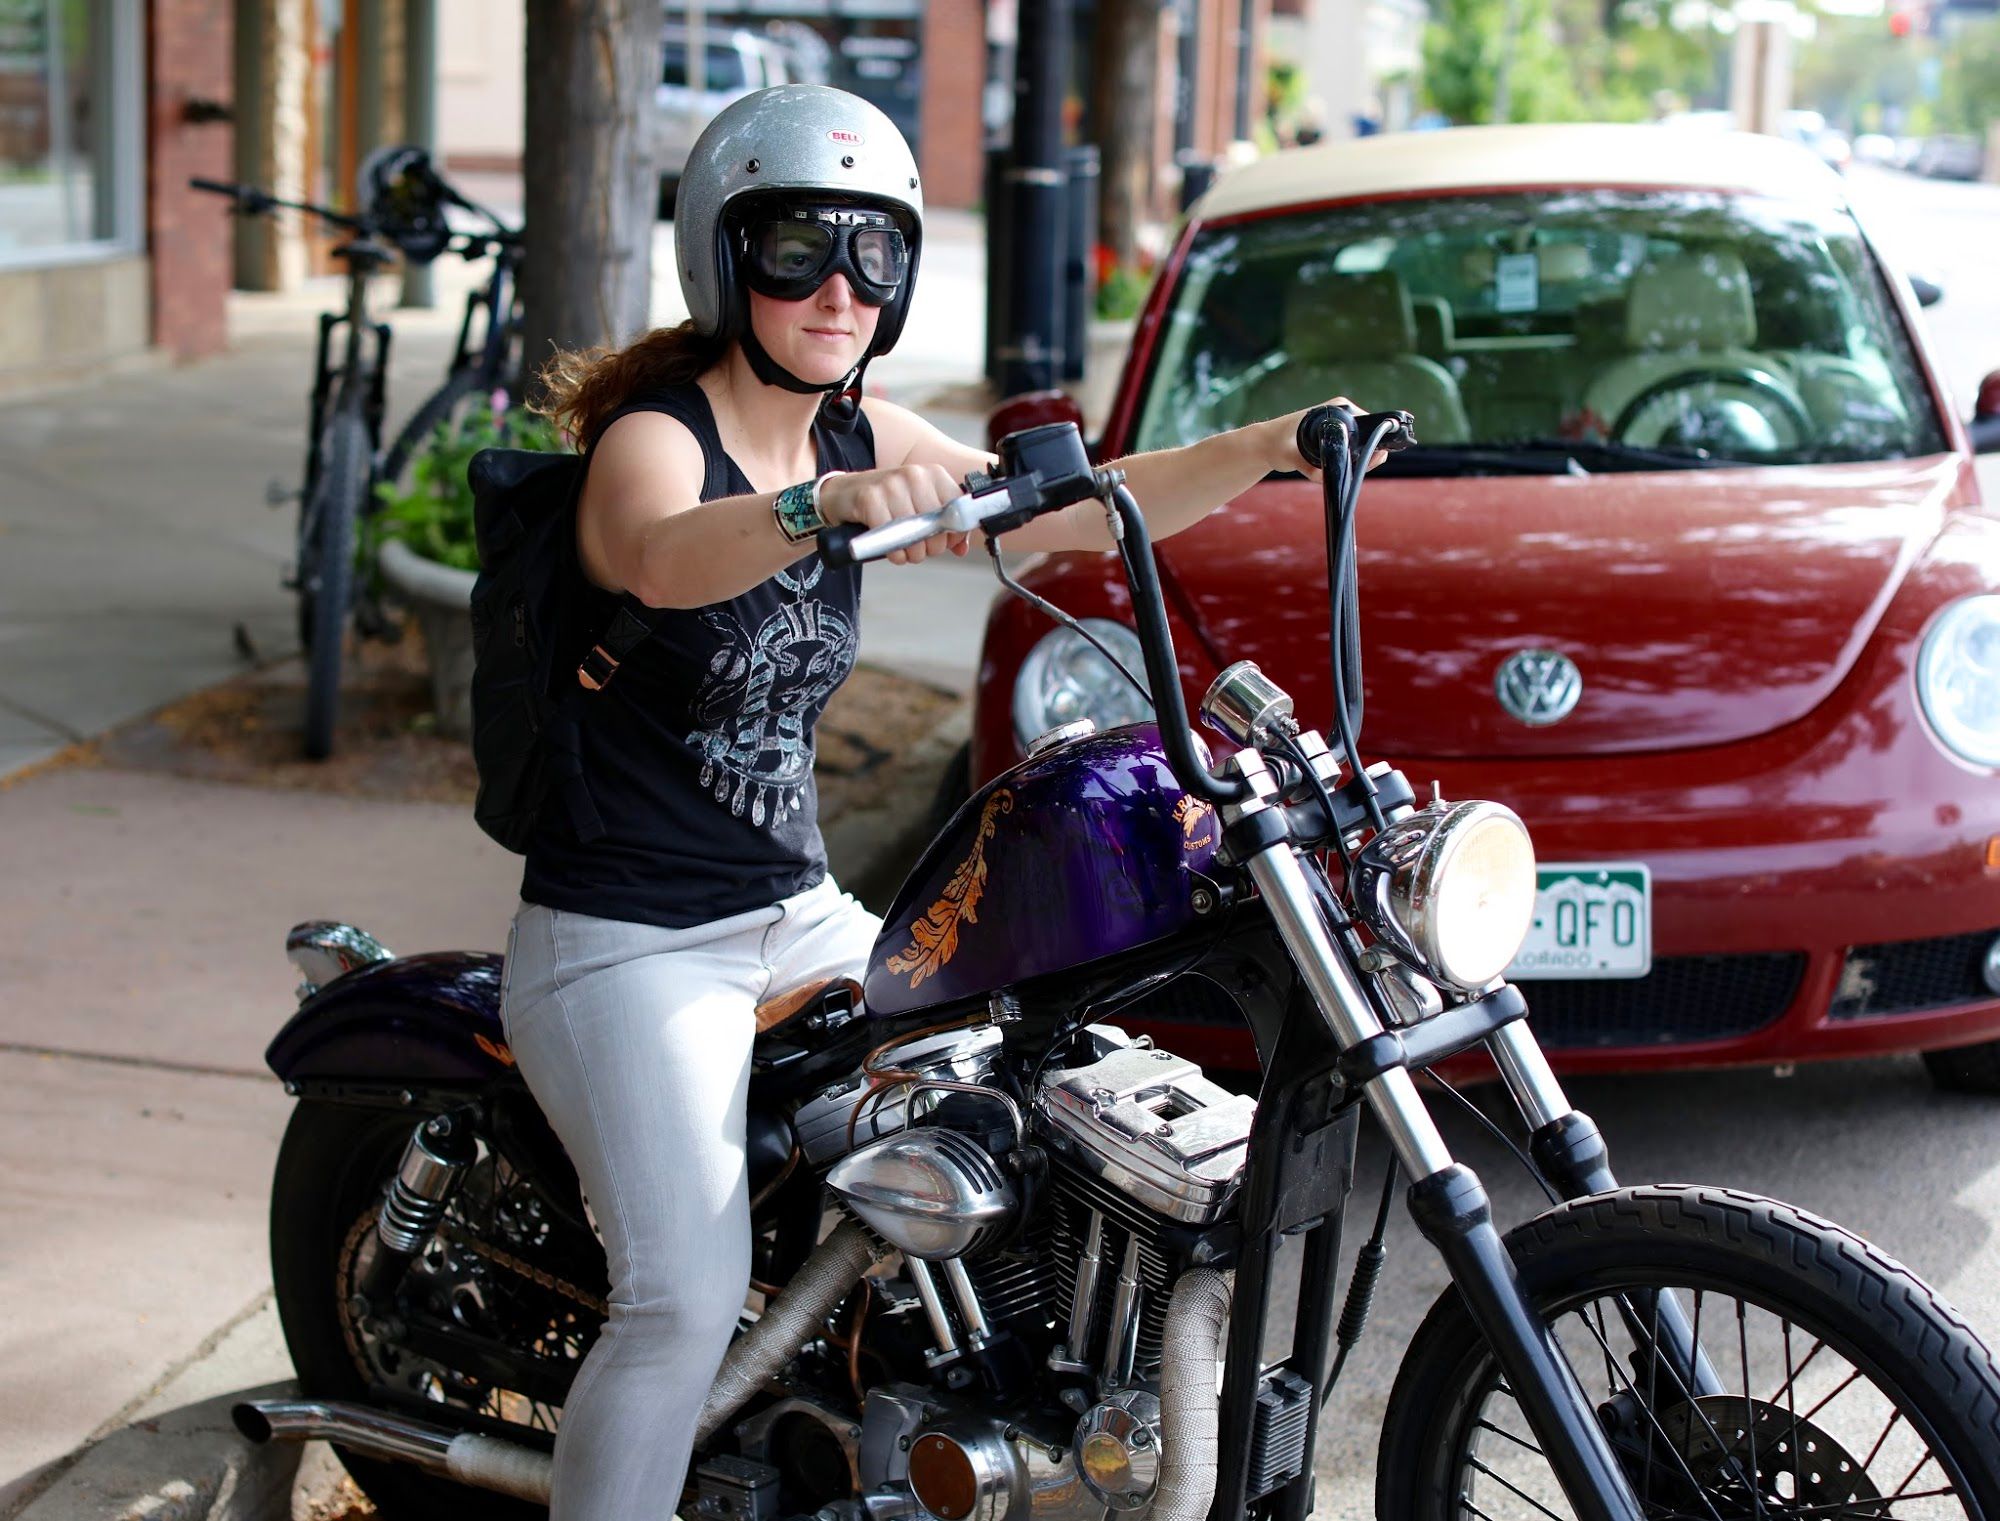 Biker Chic. She thundered in during morning coffee meetings and graciously let me take her picture. #badass